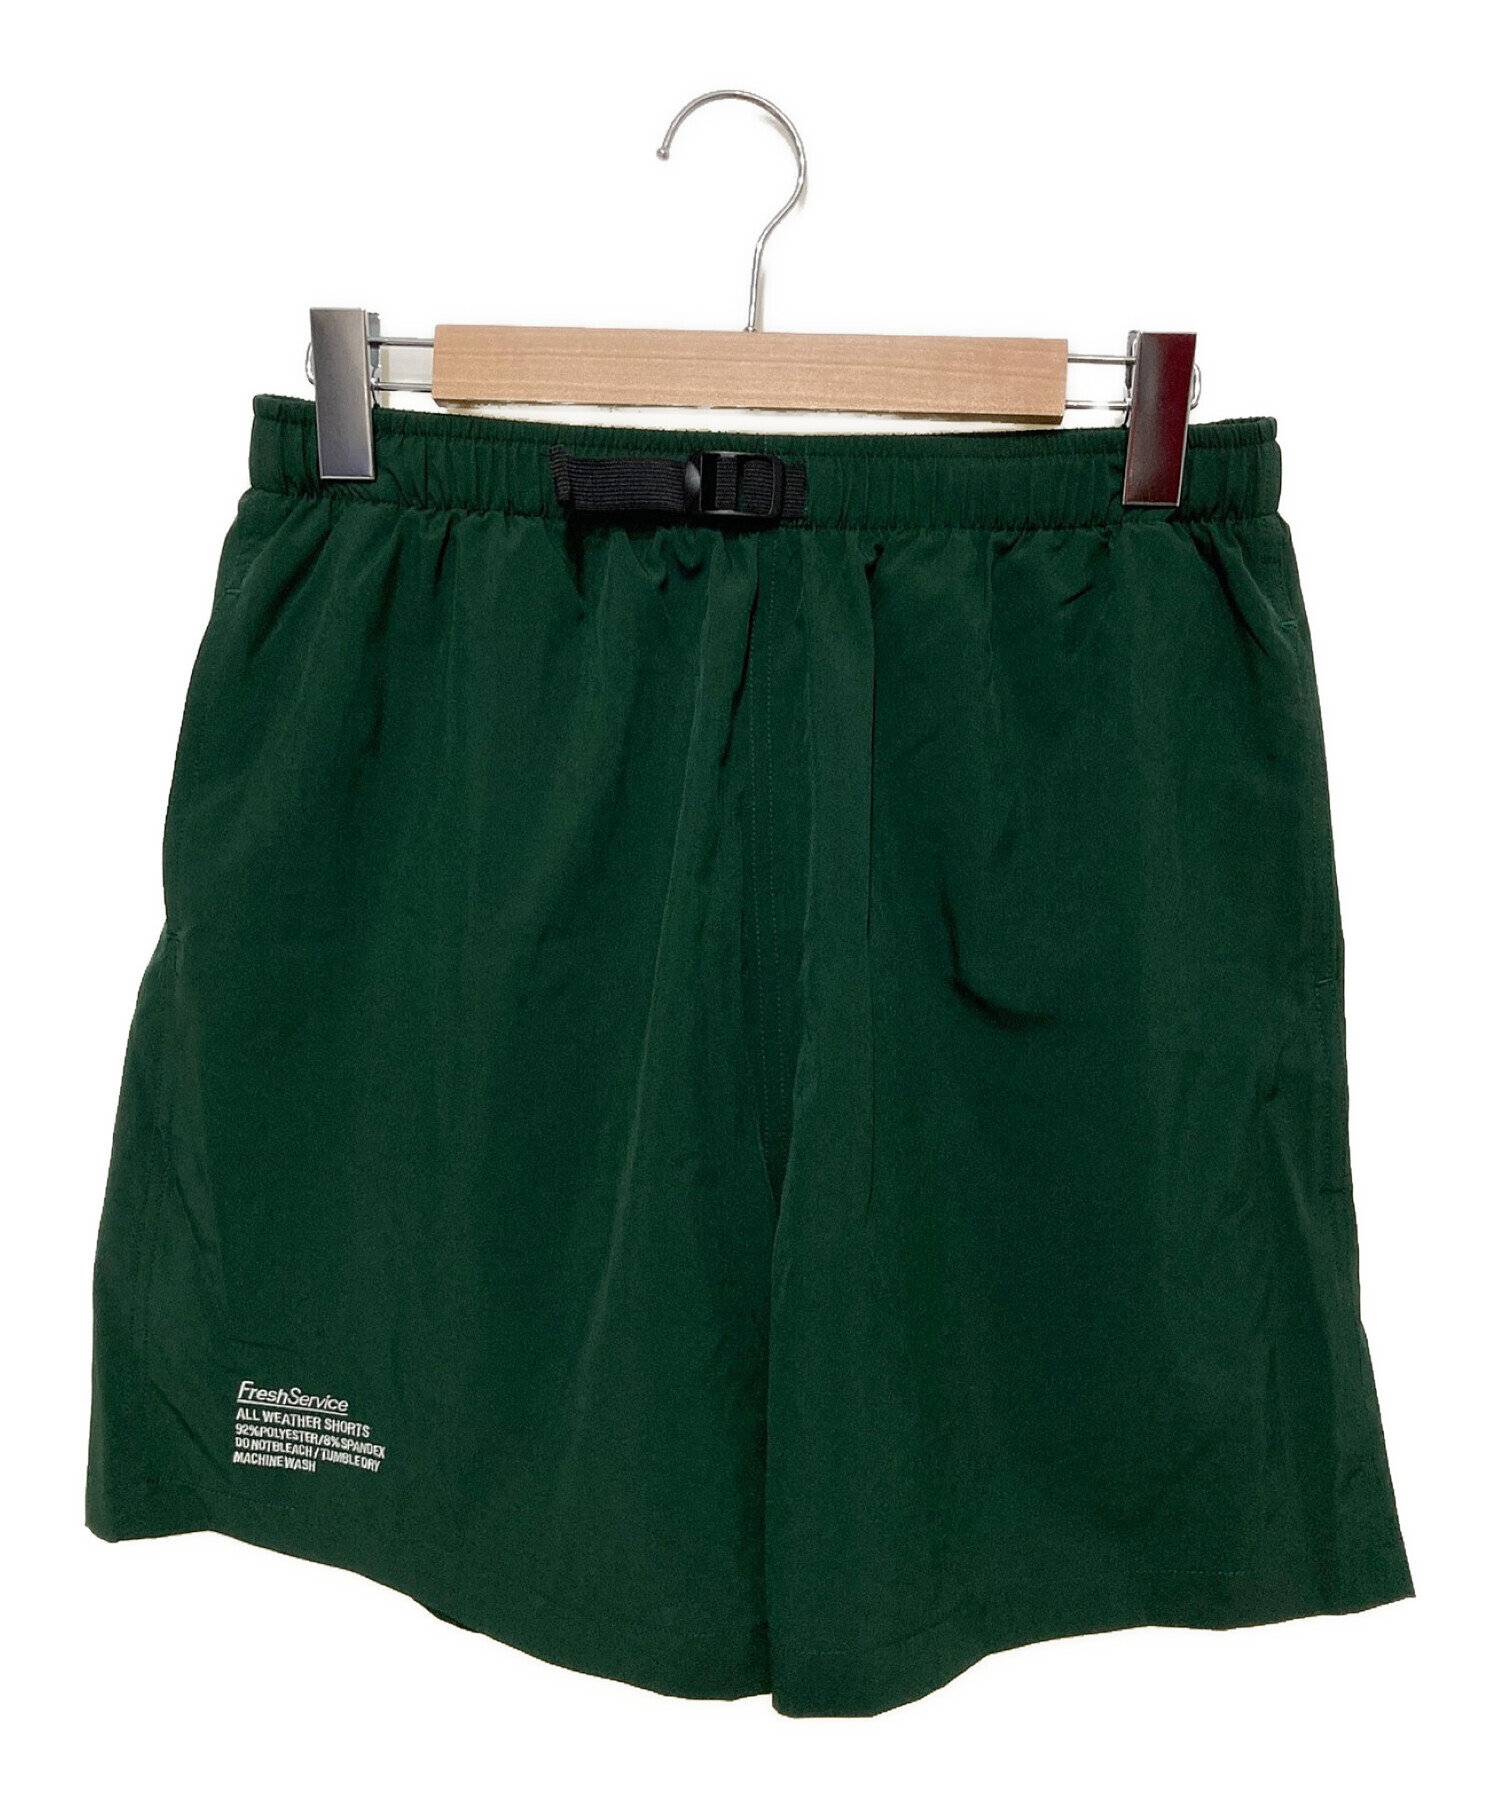 Freshservice ALL WEATHER SHORTS L グリーン 緑